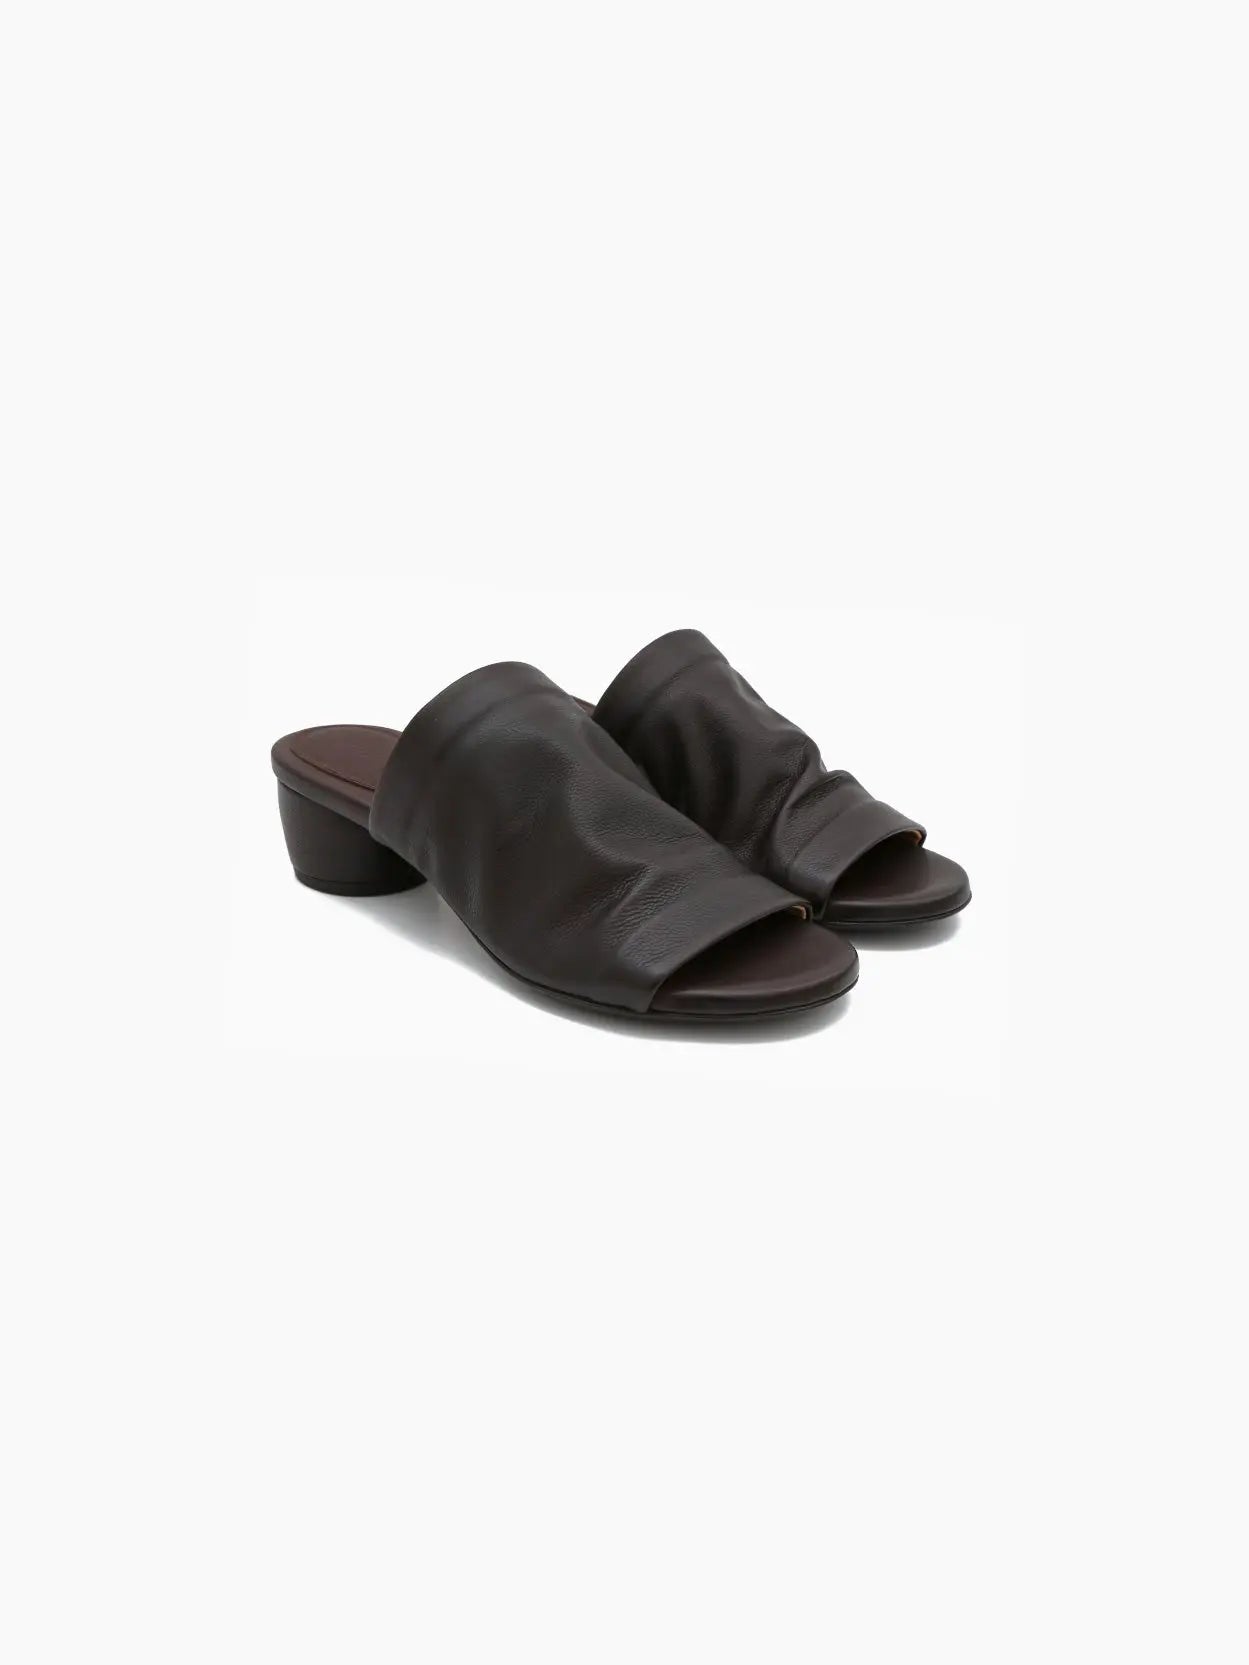 A dark brown mule-style sandal with a wide strap covering the upper foot and an open toe, available at Bassalstore. The Otto Sandal Dark Brown features a low, chunky heel and a minimalist design. Pictured against a white background in a side view, this shoe embodies chic Barcelona fashion from Marsèll.